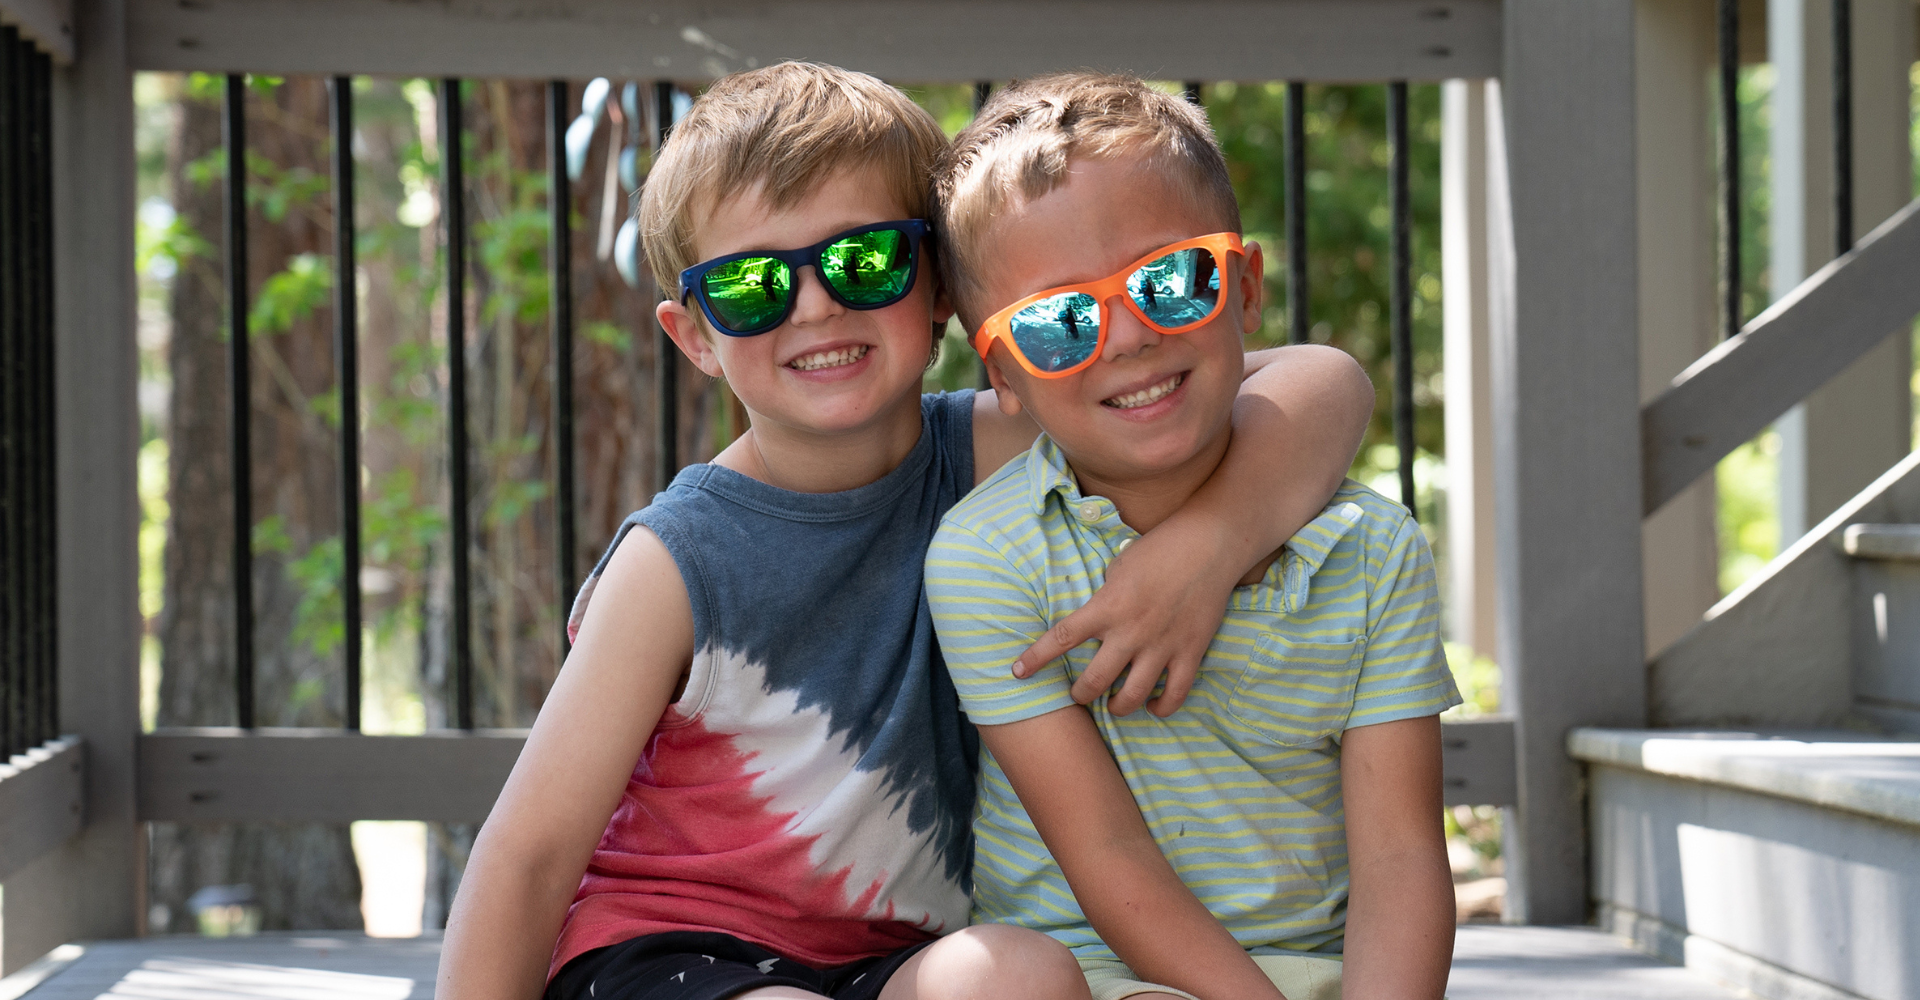 Sunnies™: Polarized Sunglasses for Kids with 100% UVA/UVB